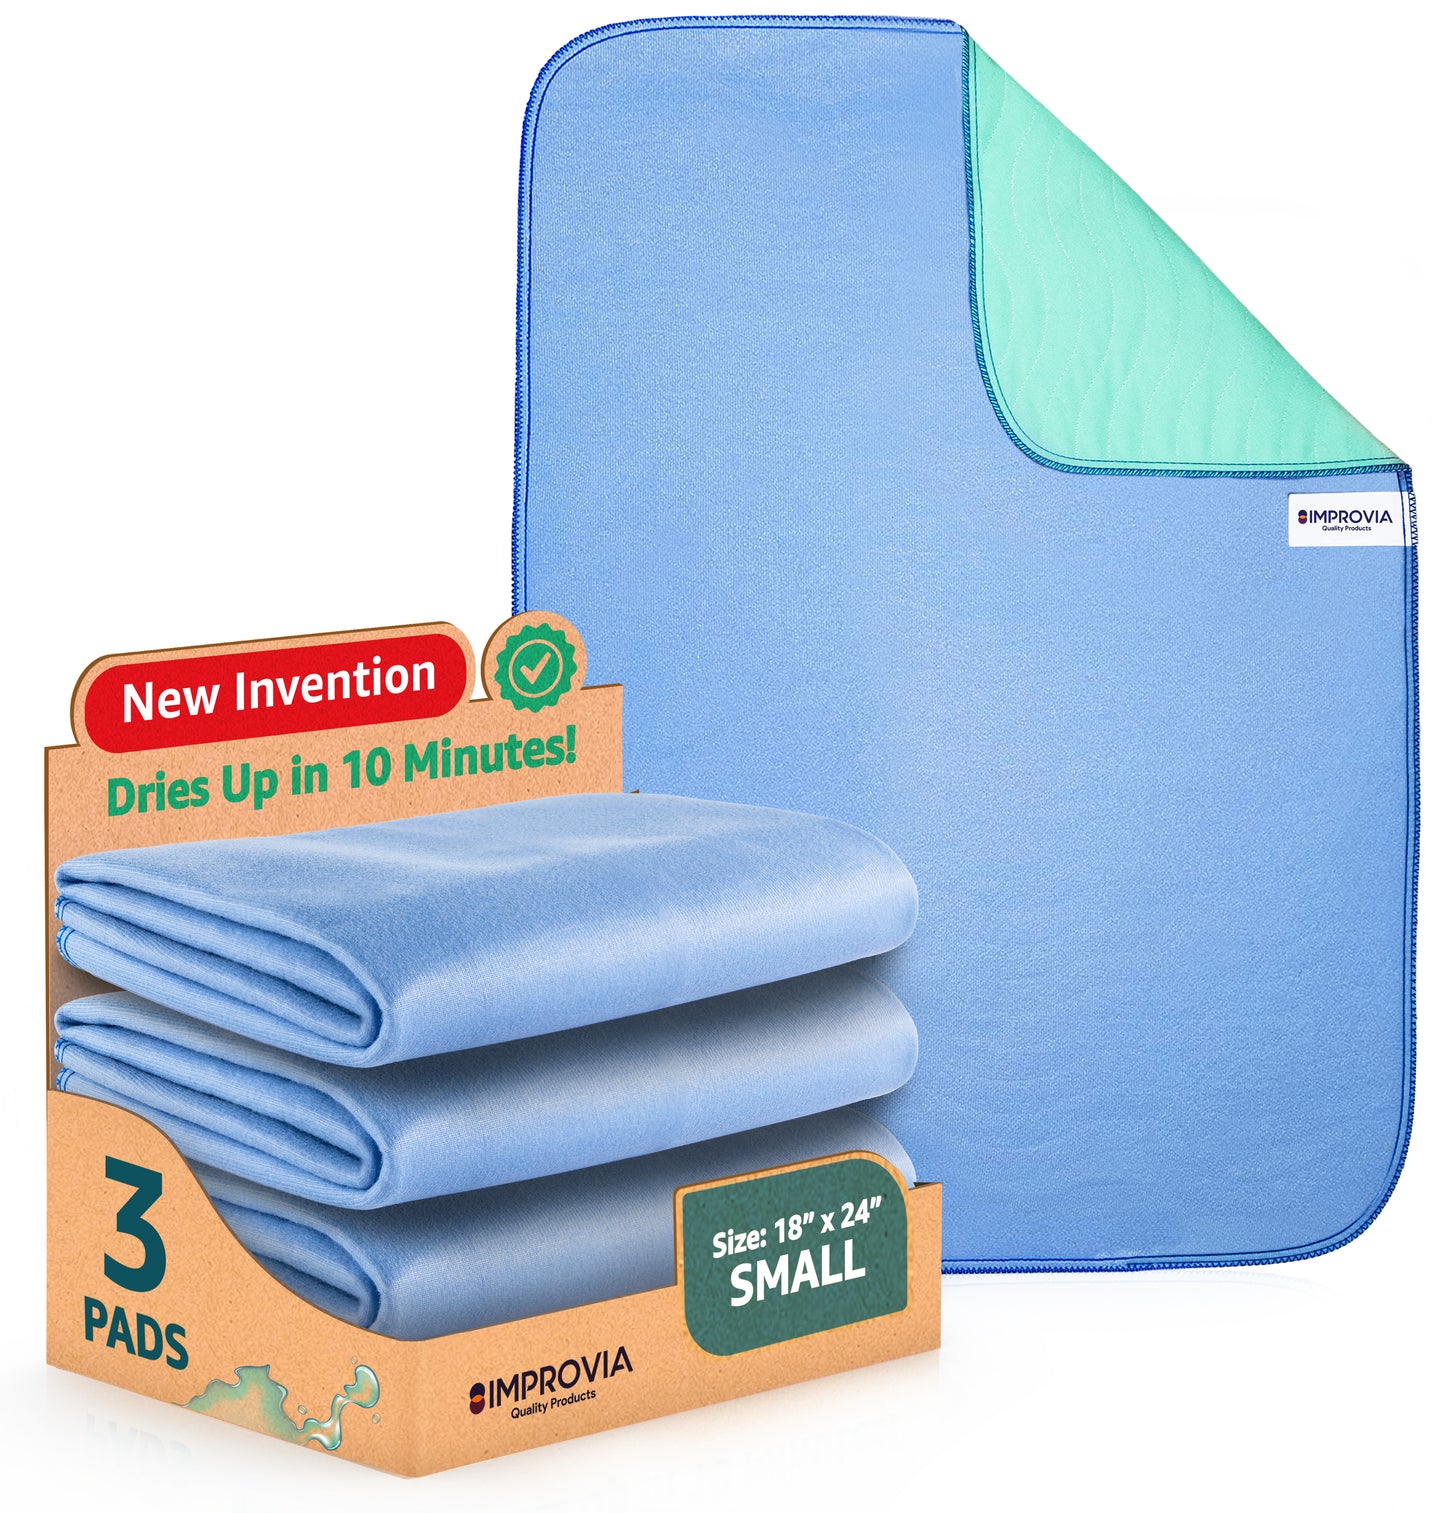 3 REUSABLE WASHABLE UNDERPADS BED PADS 36x54 HOSPITAL GRADE